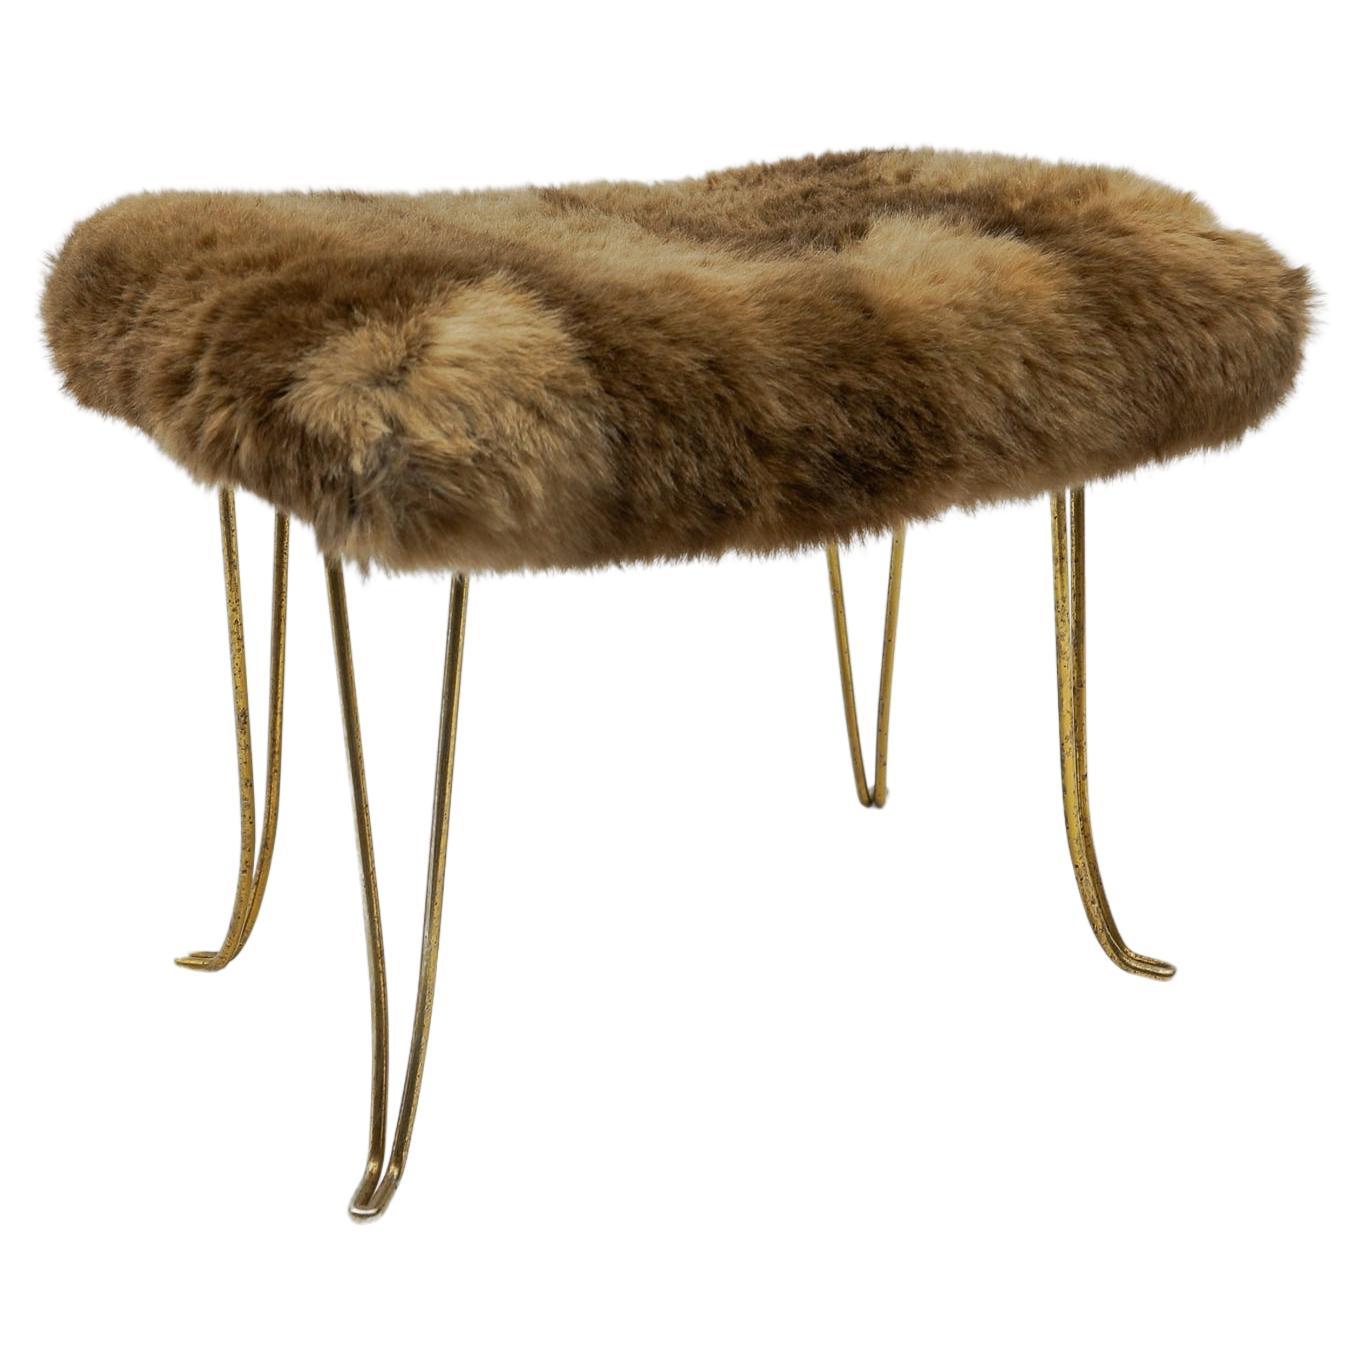 Can an ottoman be used as a footstool?